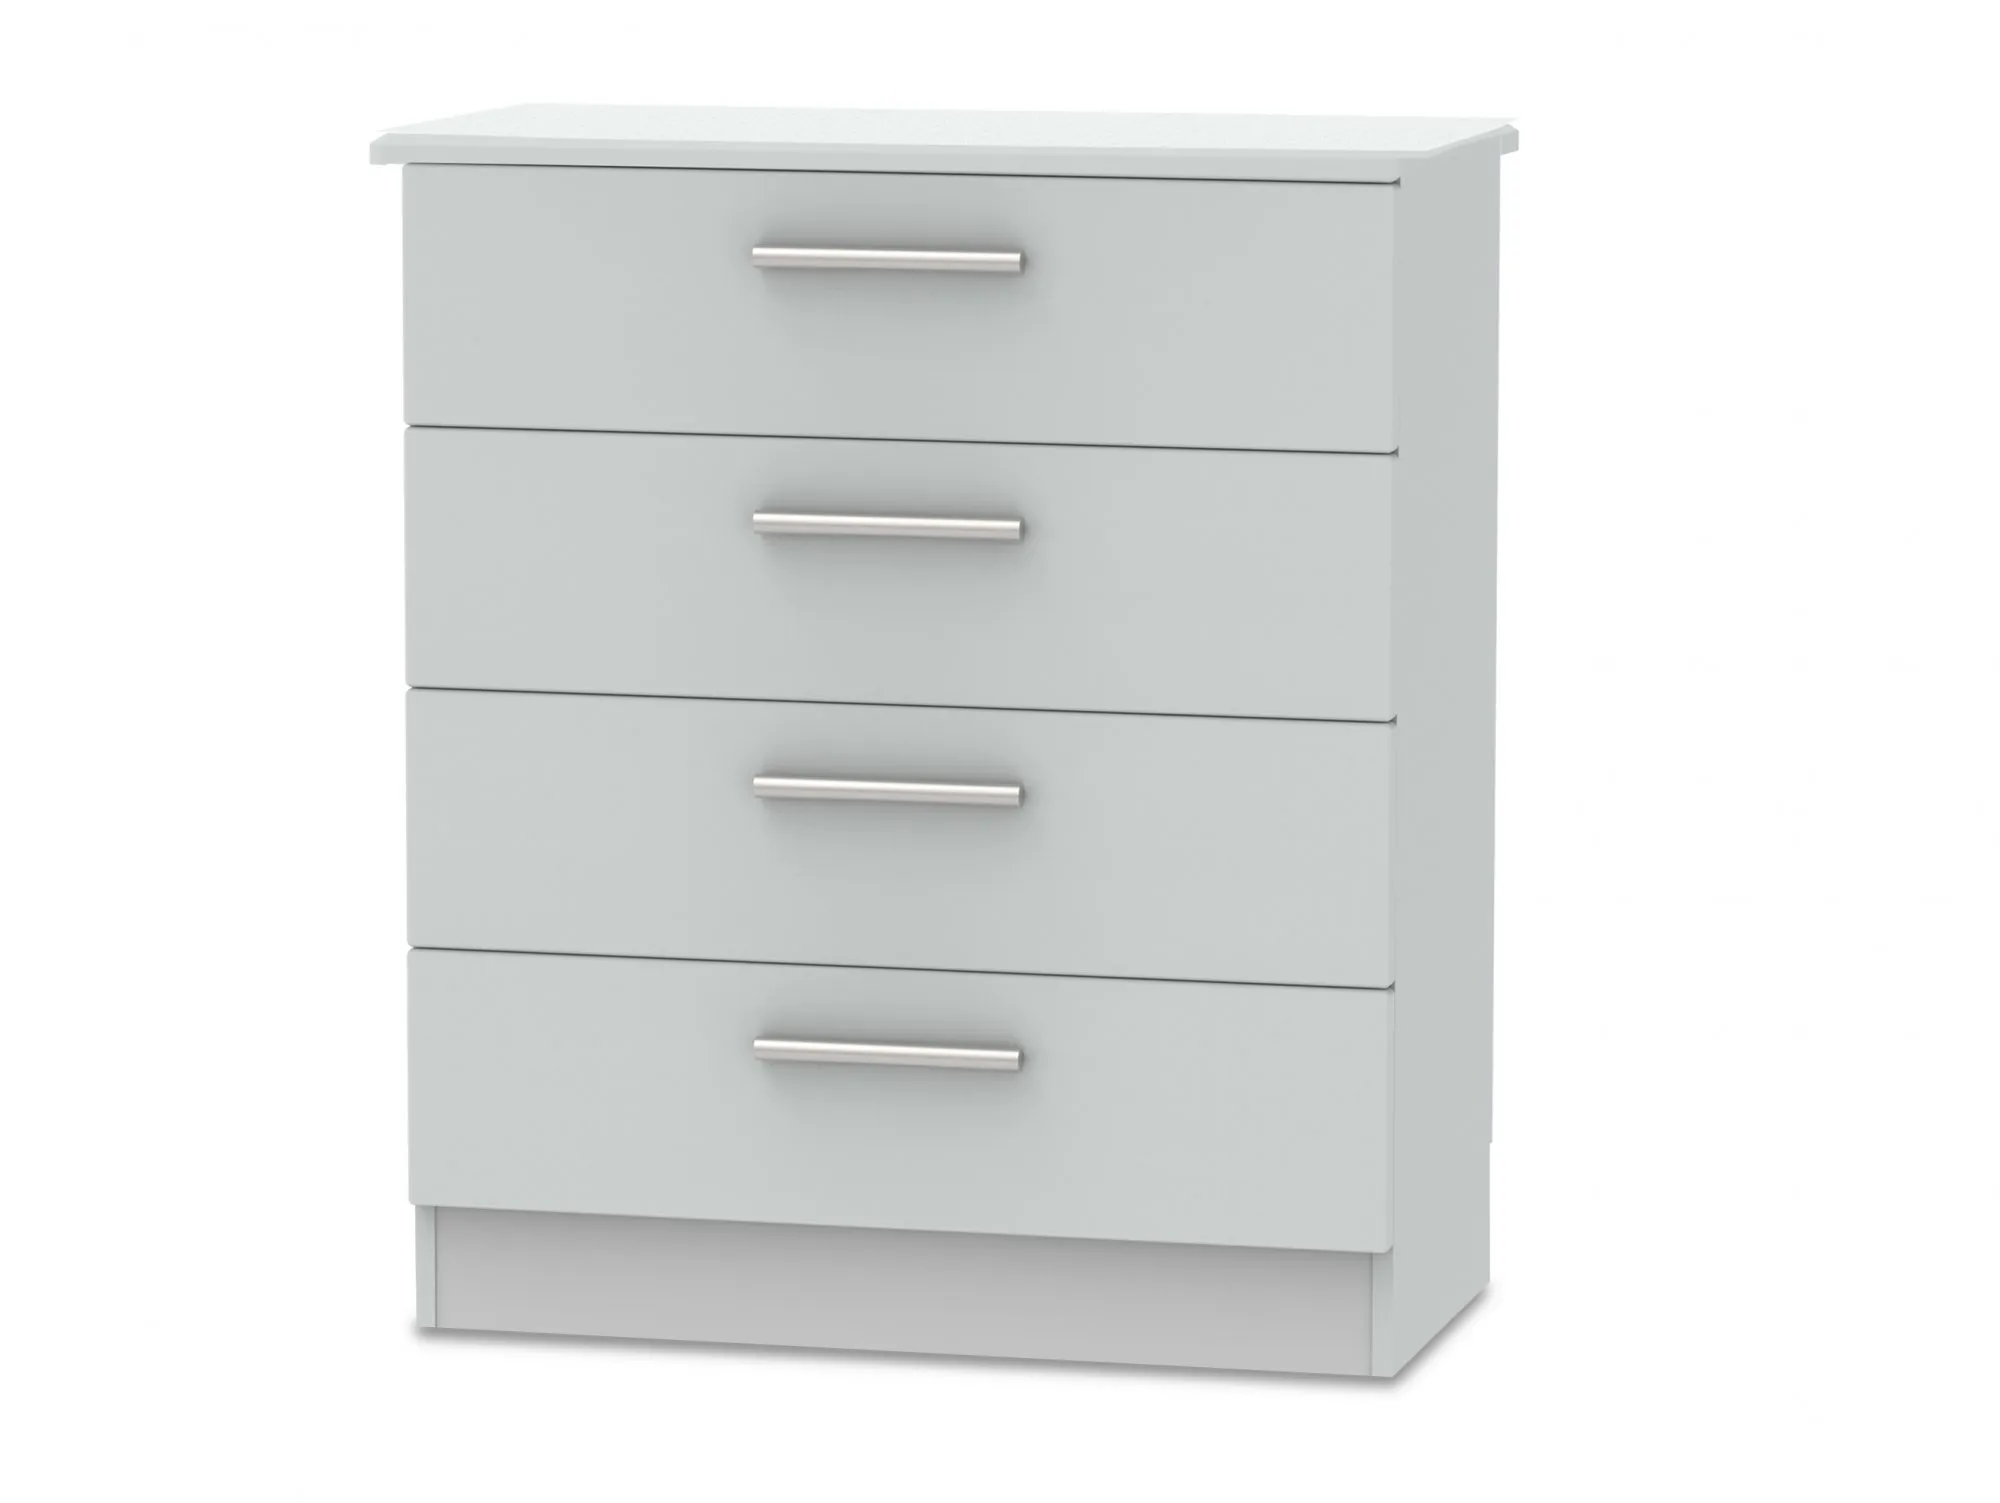 Welcome Welcome Knightsbridge Matt Grey 4 Drawer Chest of Drawers (Assembled)